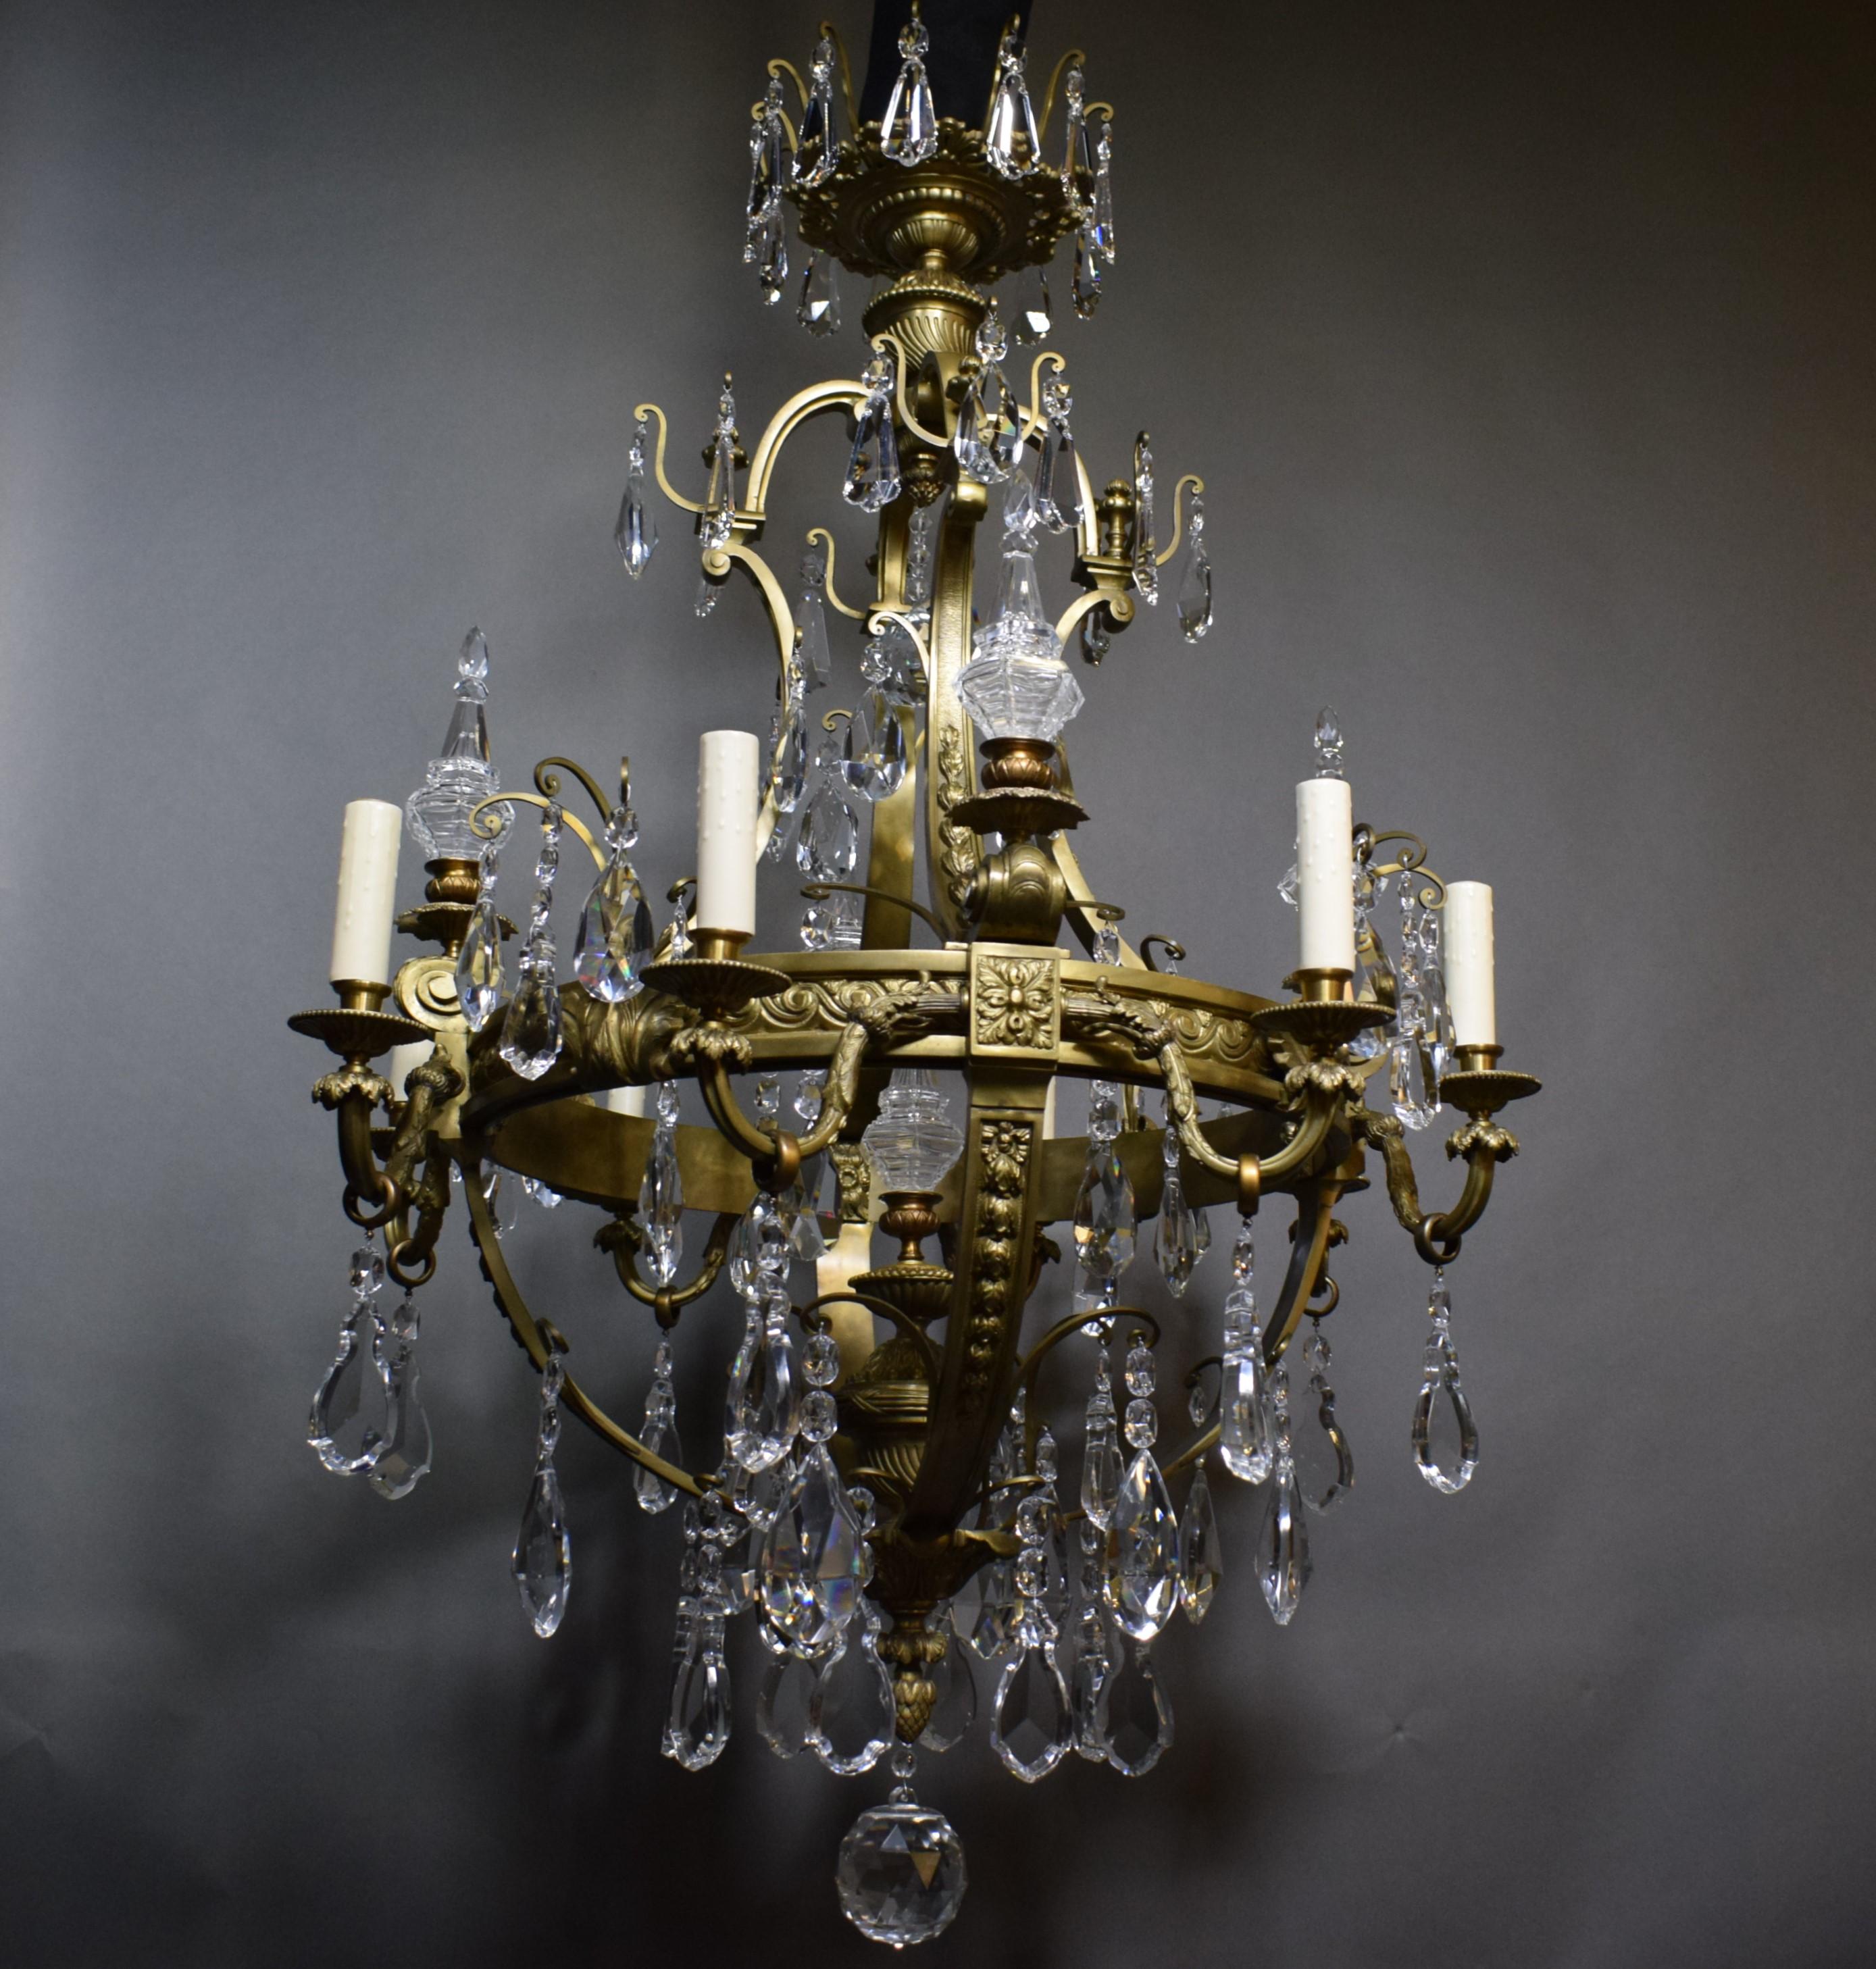 A magnificent Louis XVI chandelier featuring five hand cut crystal pyramids. 8 lights. Very fine bronze work. France, circa 1910.
Dimensions: Height 60